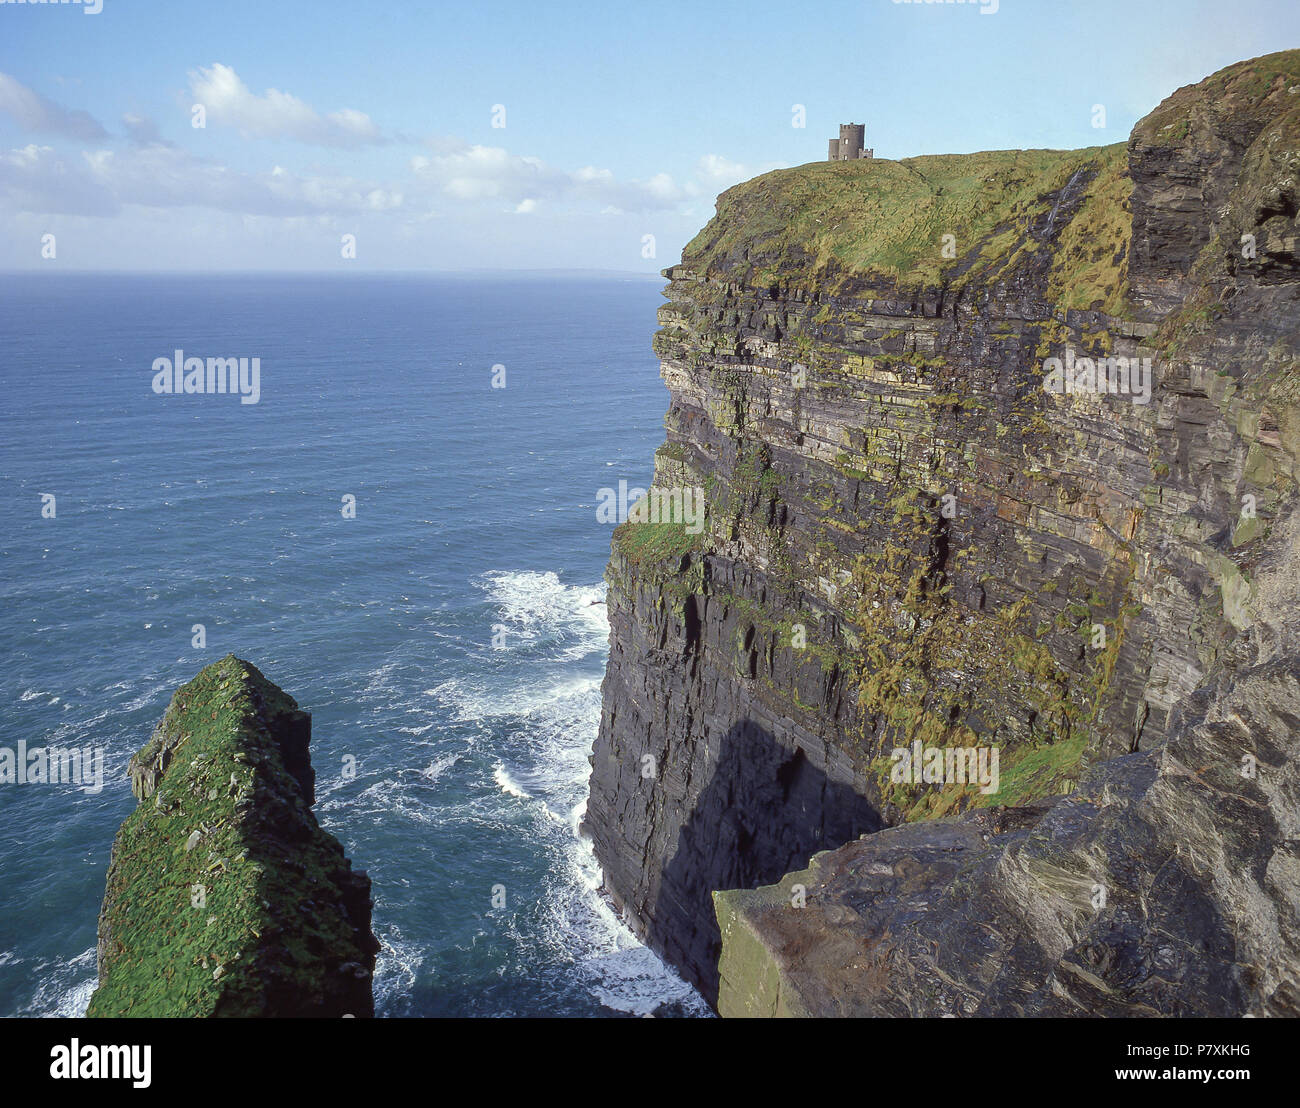 Cliffs of Moher (Aillte an Mhothair) showing O'Brien's Tower, County Clare, Munster Province, Republic of Ireland Stock Photo